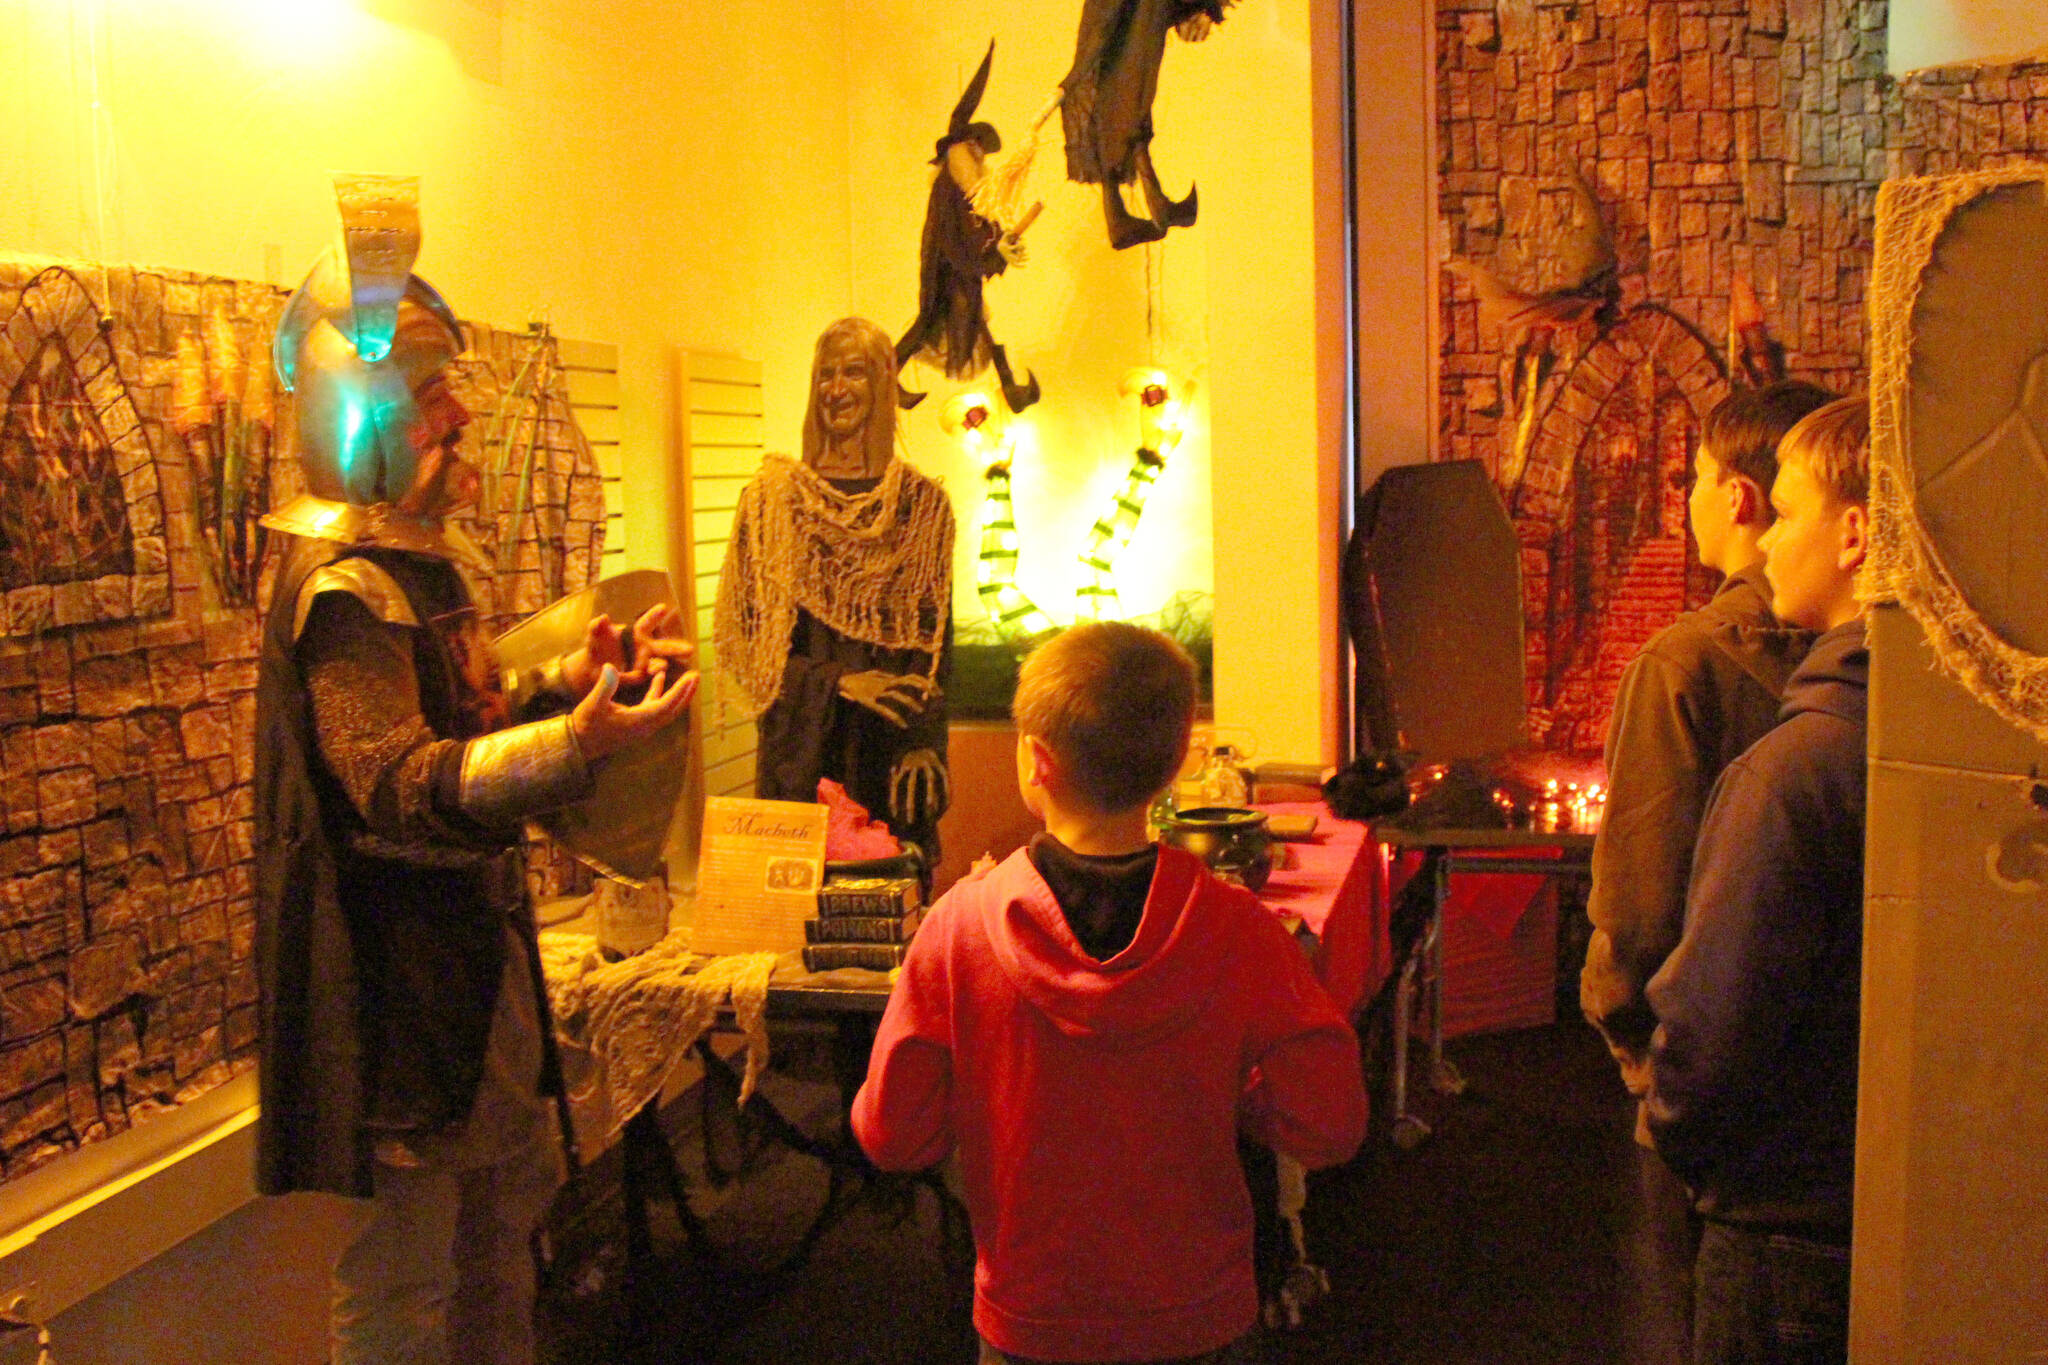 Sir James Adcox, left, leads Silas Barnes, Manoah Barnes and Nehemiah Barnes through the Literary Haunted House at the Kenai Community Library on Oct. 30, 2019. (Photo by Brian Mazurek/Peninsula Clarion)
Sir James Adcox, left, leads Silas Barnes, Manoah Barnes and Nehemiah Barnes through the Literary Haunted House at the Kenai Community Library on Oct. 30, 2019. (Photo by Brian Mazurek/Peninsula Clarion file)